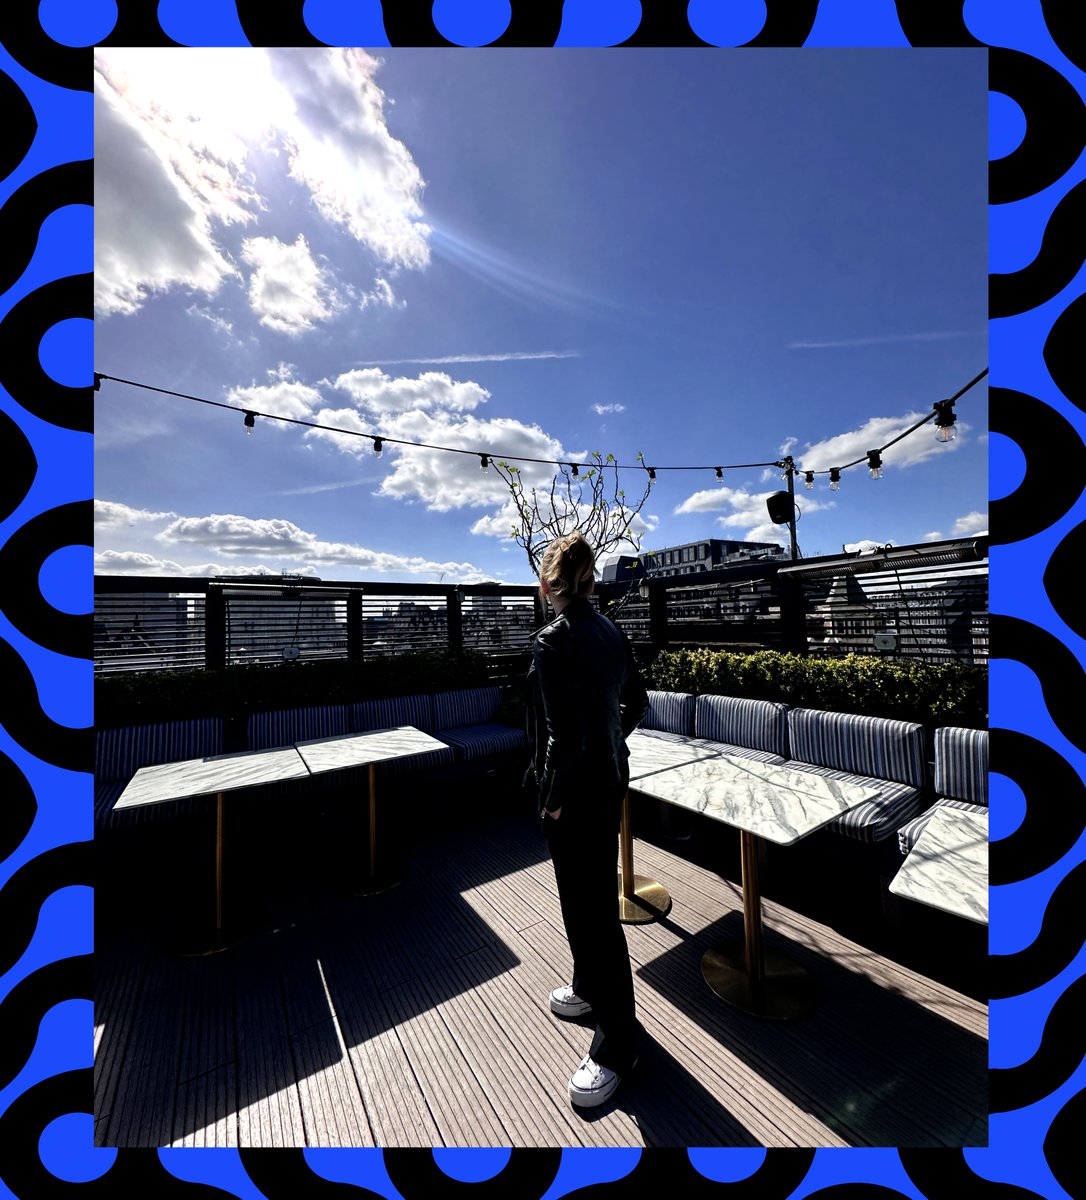 Behind the scenes : Venue scouting today for our upcoming event with the Head of Marketing Clare Roberts! 😎

Stay tuned for the big reveal 🙌 

To know more about MedialakeAI - demo.medialake.ai/x

#eventplanning #medialakeai #contentdatamanagement